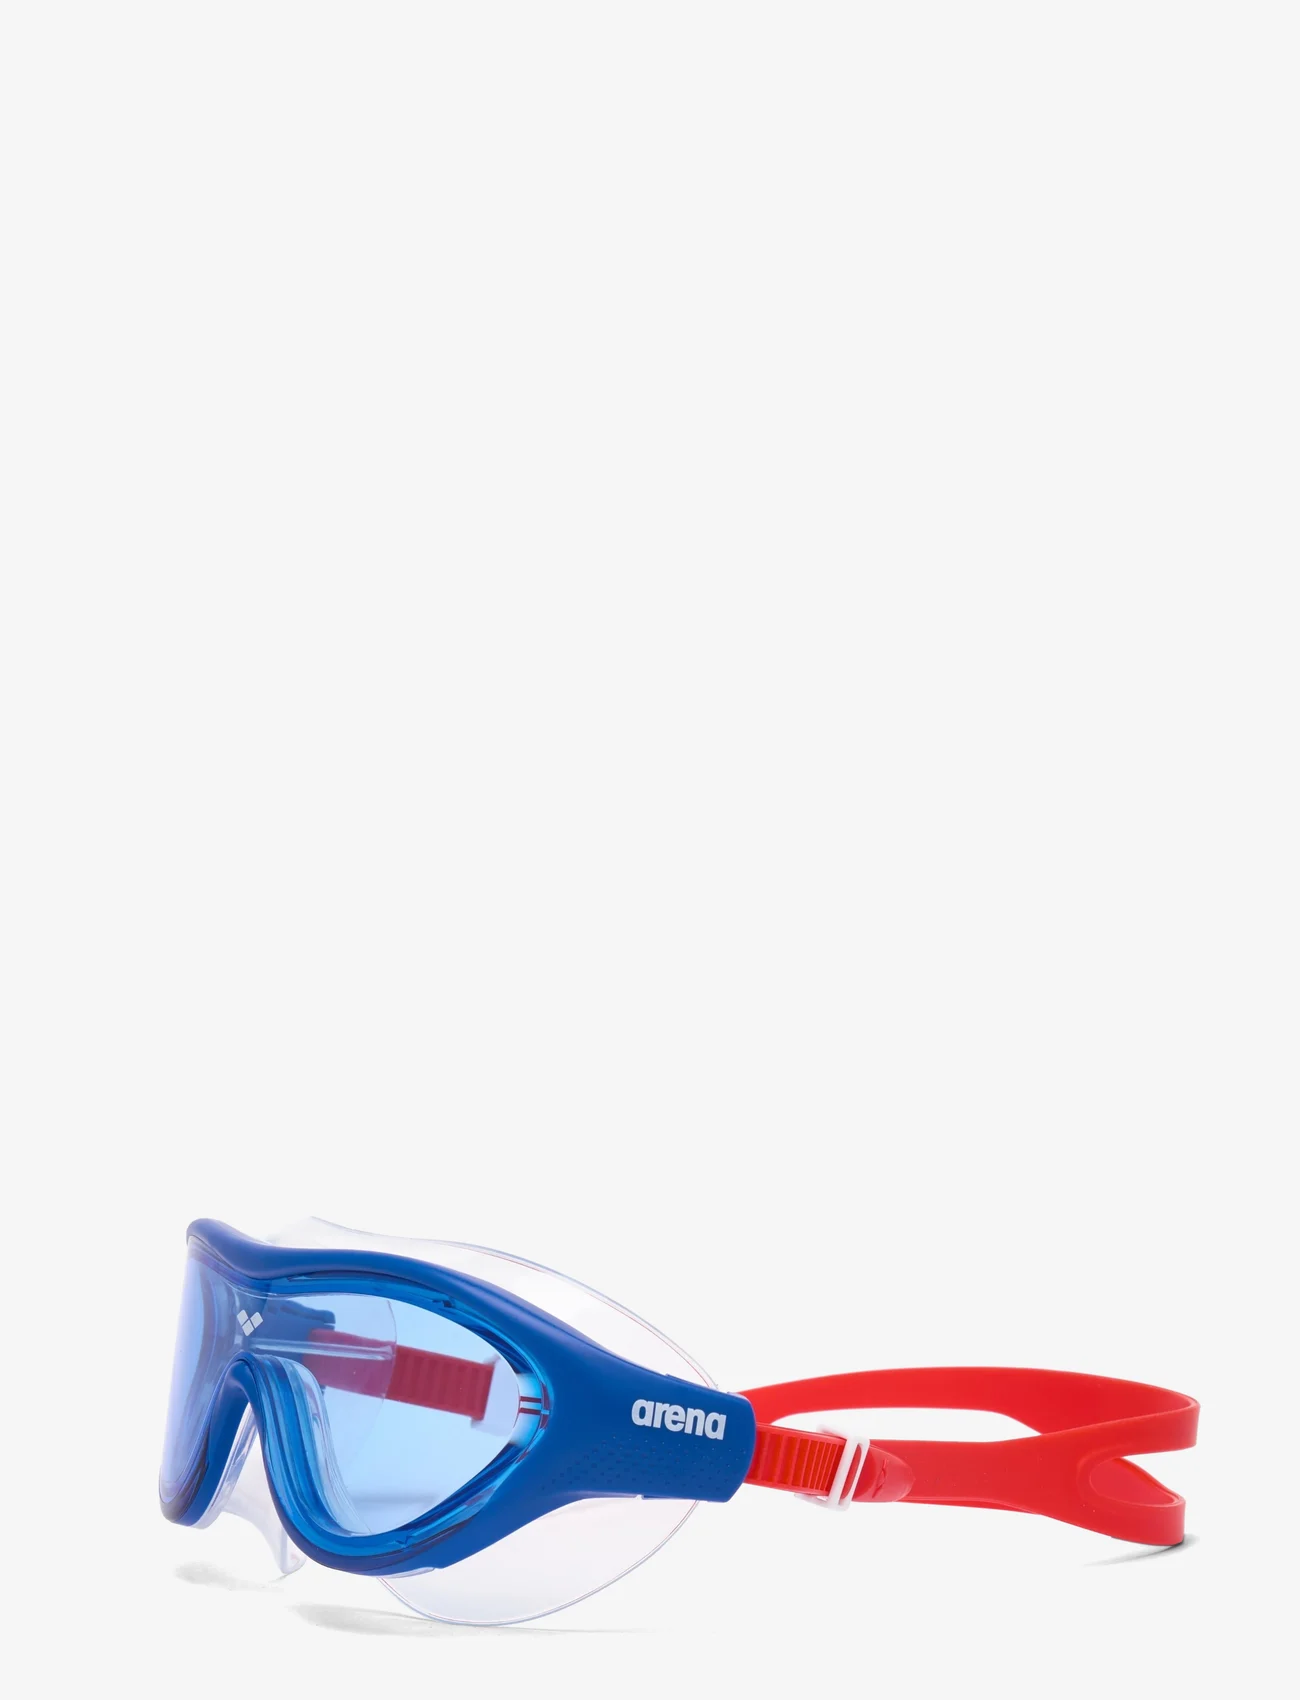 Arena - THE ONE MASK JR BLUE-BLUE-RED - swimming accessories - blue-blue-red - 1